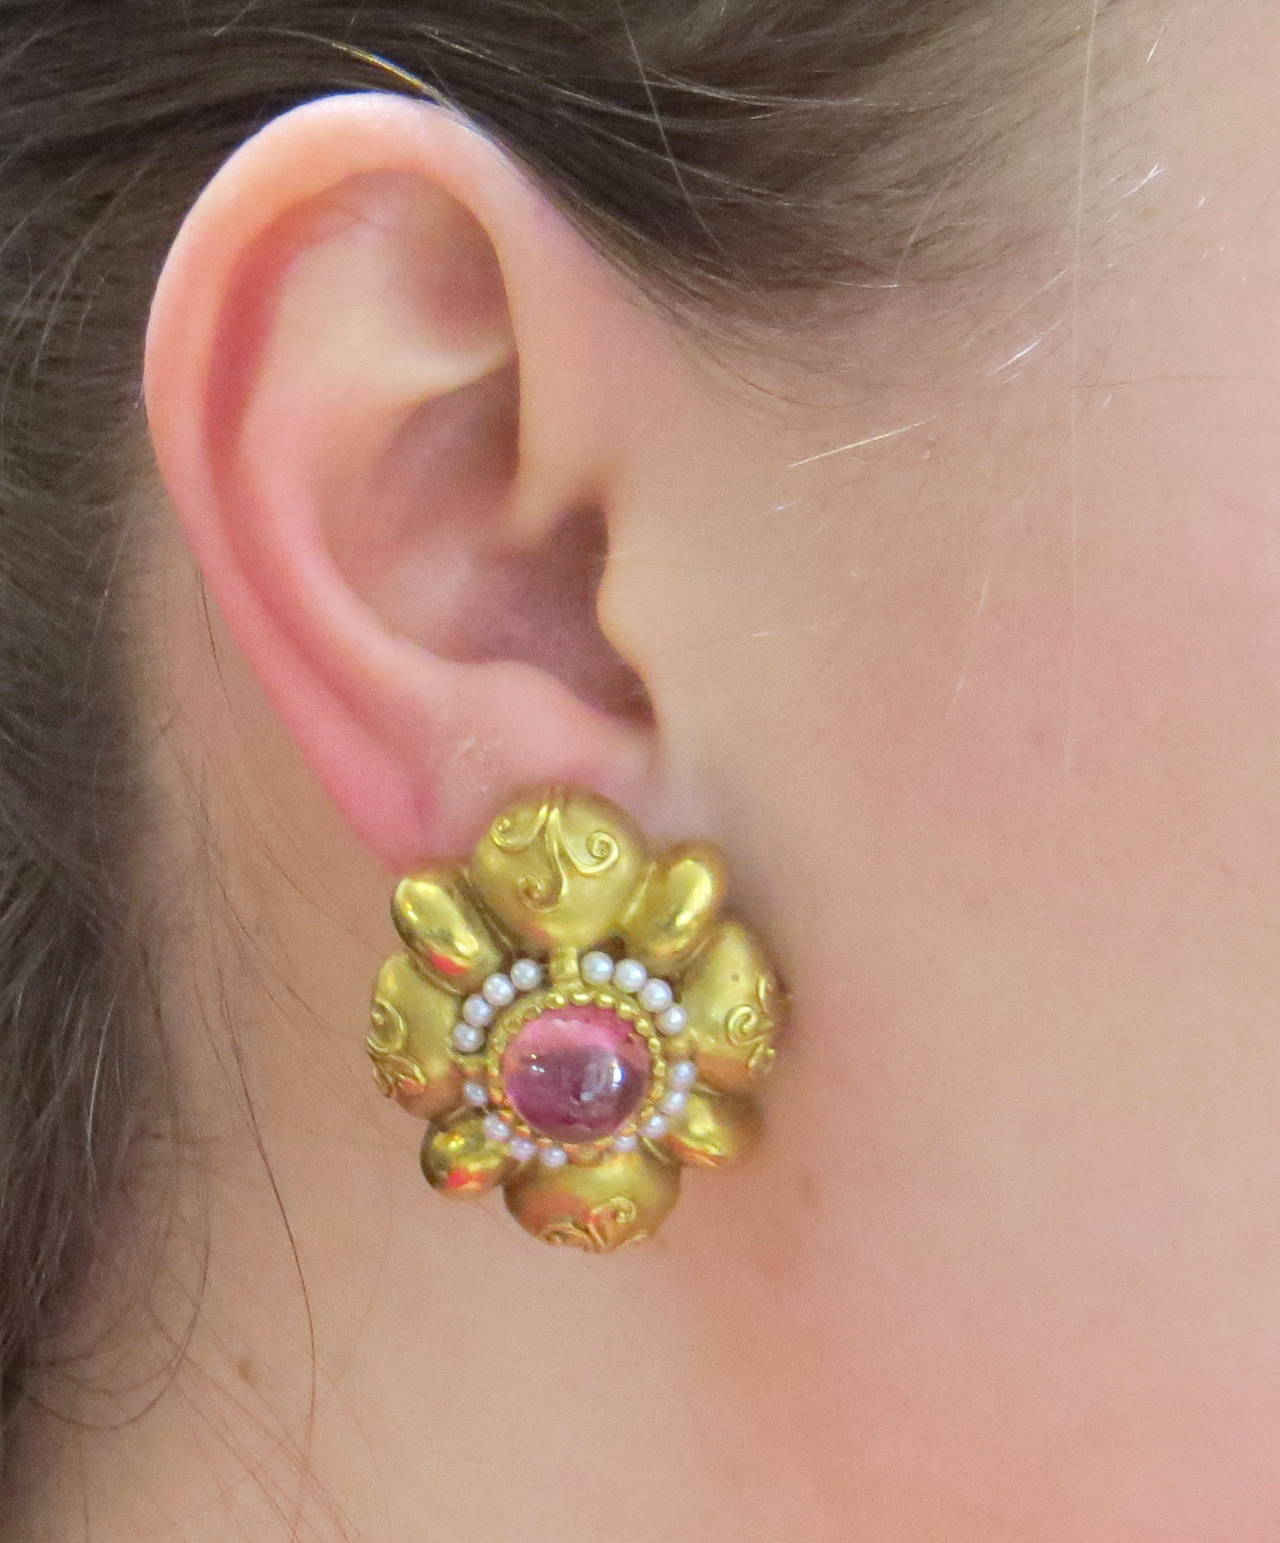 18k gold large Seidengang earrings, featuring 10.2mm pink tourmalines, surrounded with pearls. Earrings are 34mm x 27mm. Marked SG and 18k. Weight - 39.6 grams